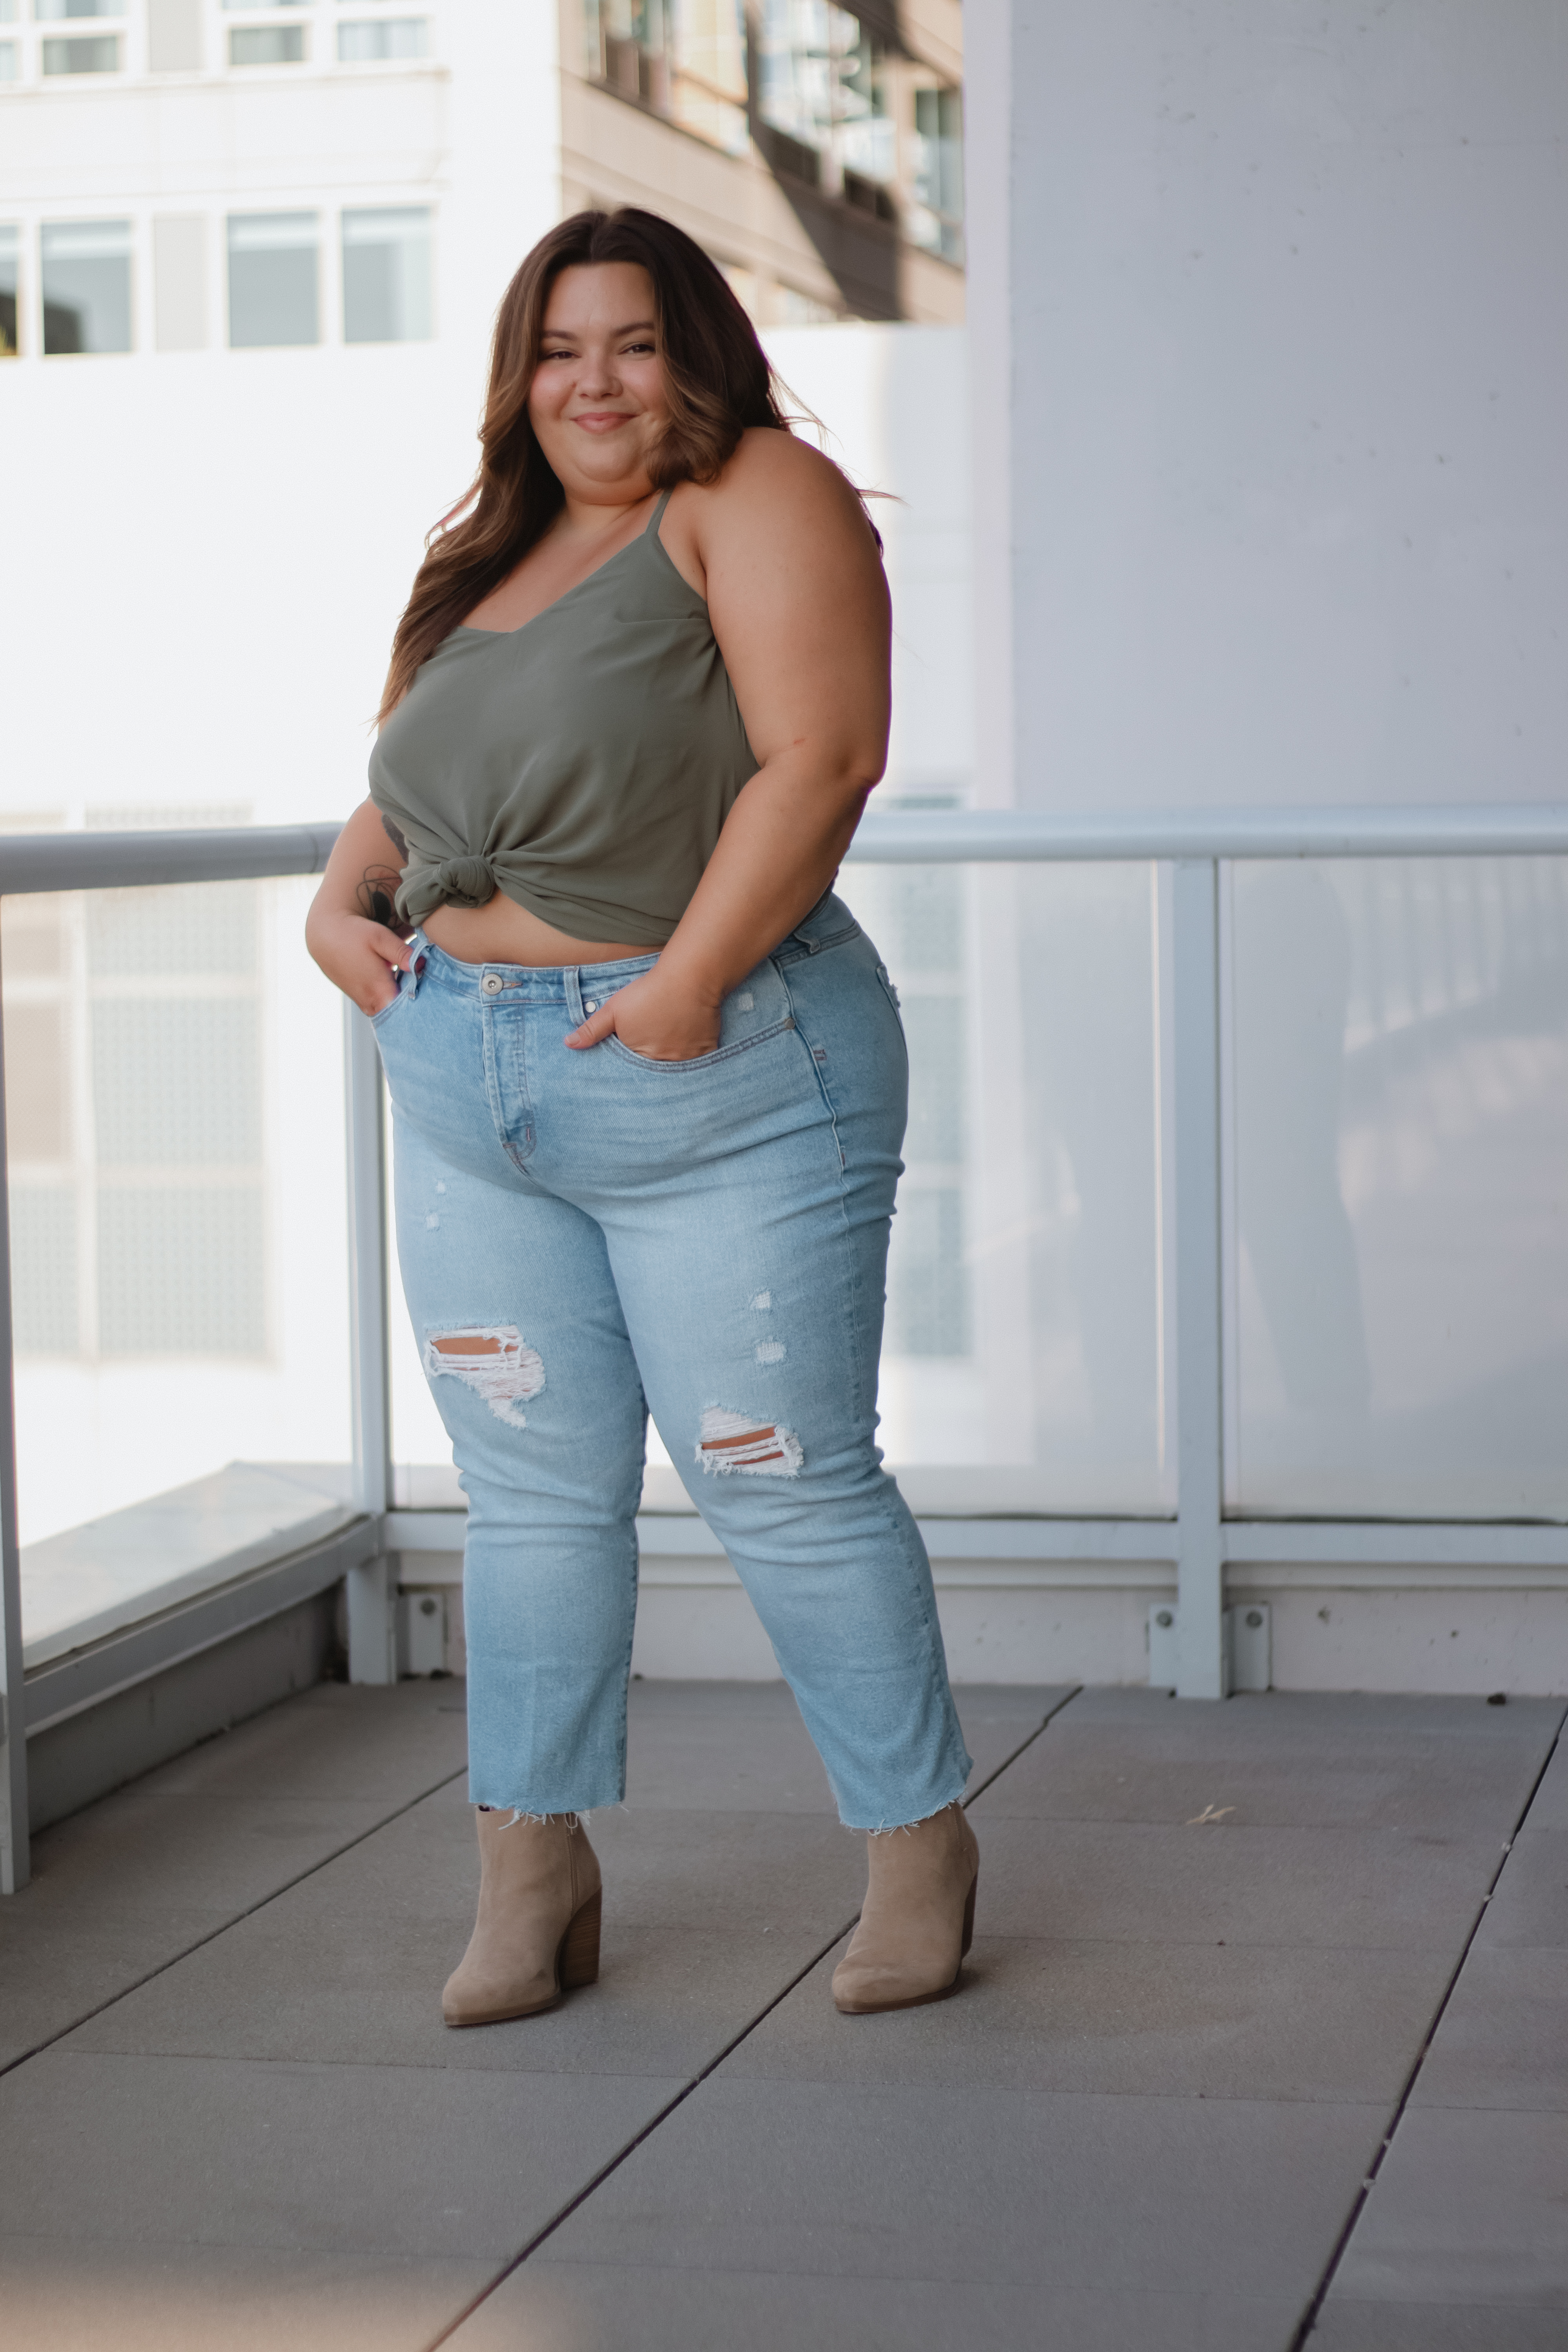 Petite plus size fashion blogger Natalie in the City shares the best clothing brands to shop for curvy short jeans.